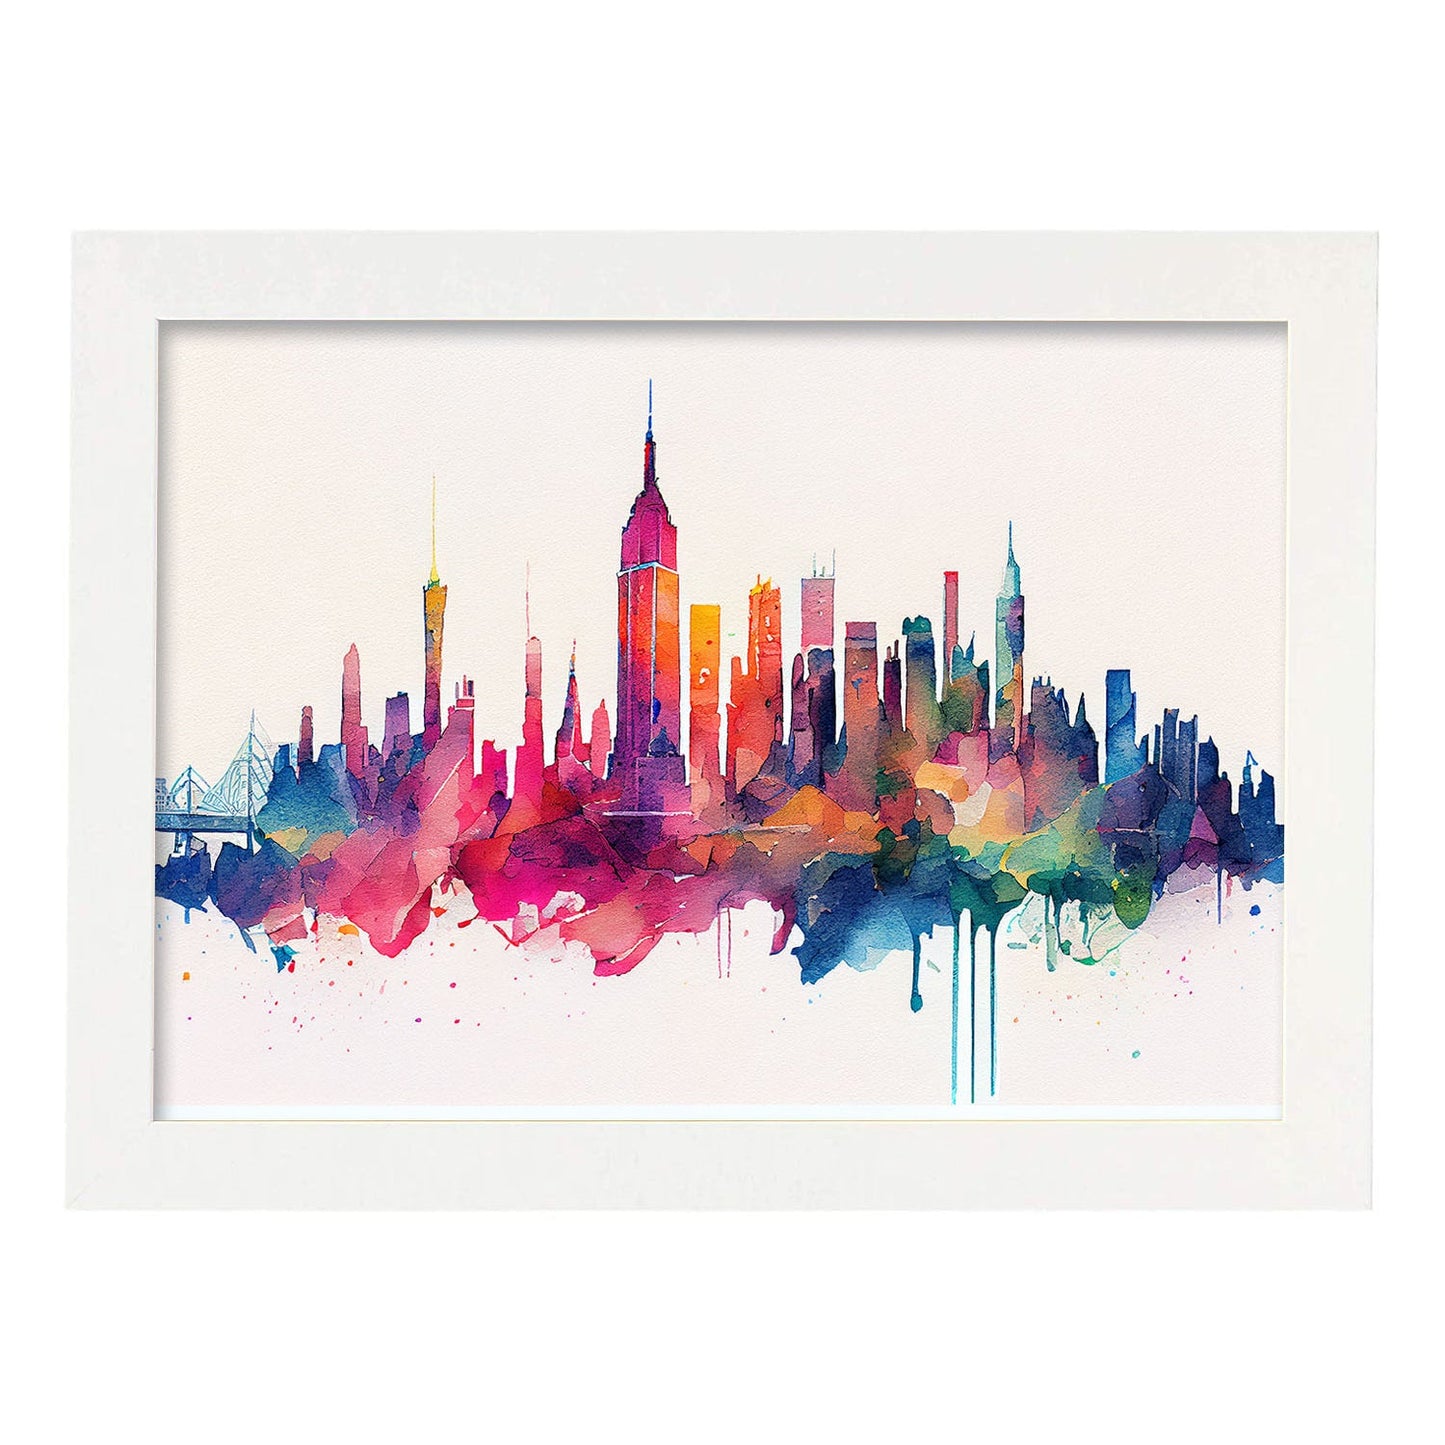 Nacnic watercolor of a skyline of the city of New York_2. Aesthetic Wall Art Prints for Bedroom or Living Room Design.-Artwork-Nacnic-A4-Marco Blanco-Nacnic Estudio SL